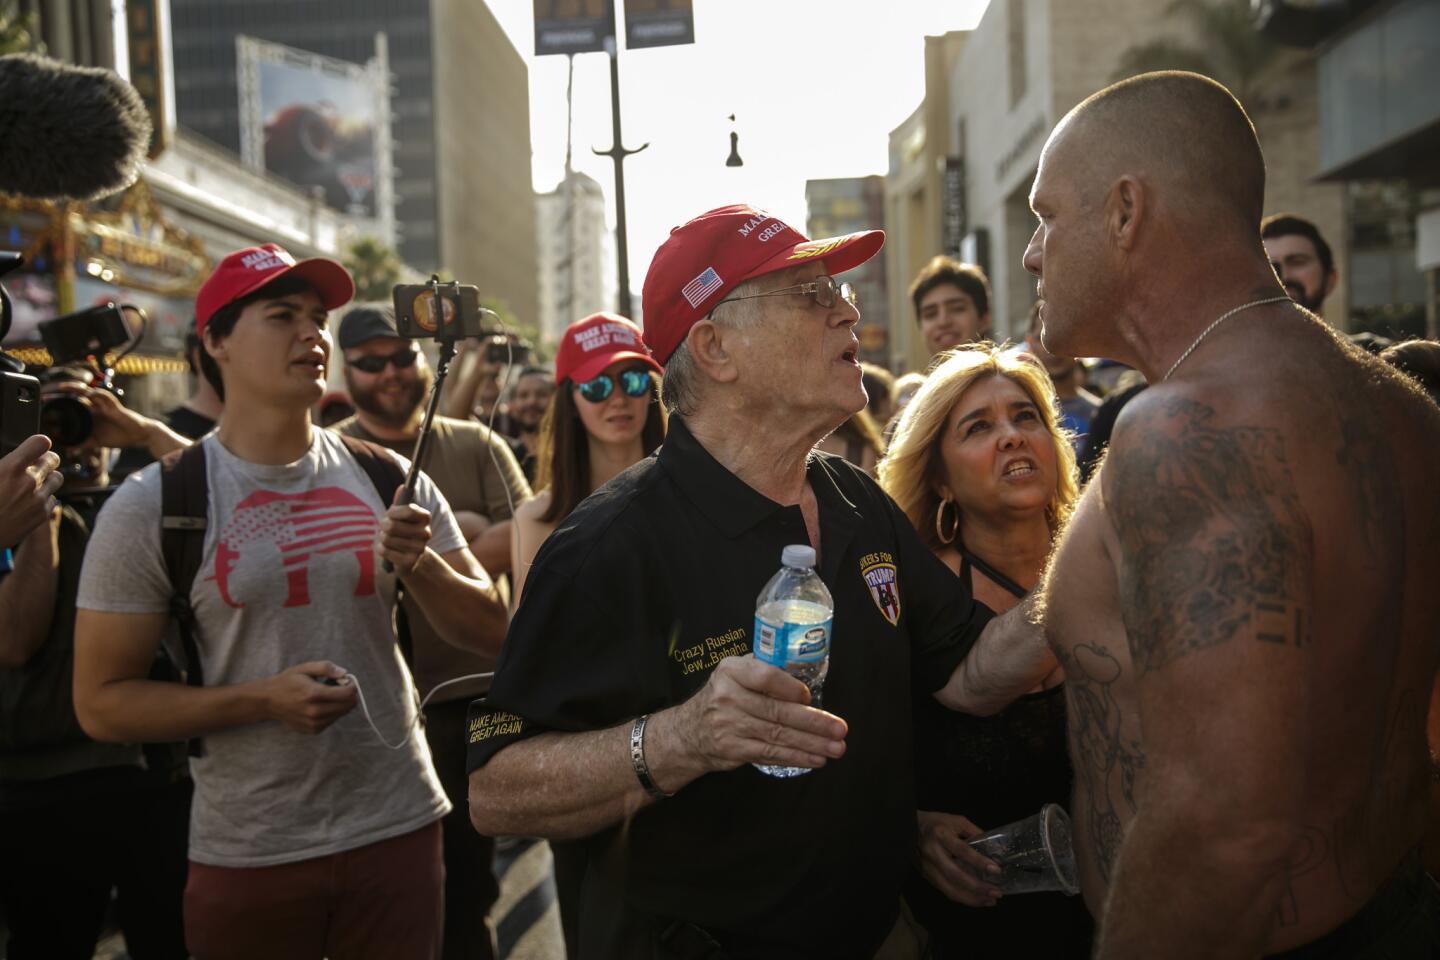 A Trump supporter argues with a protester.